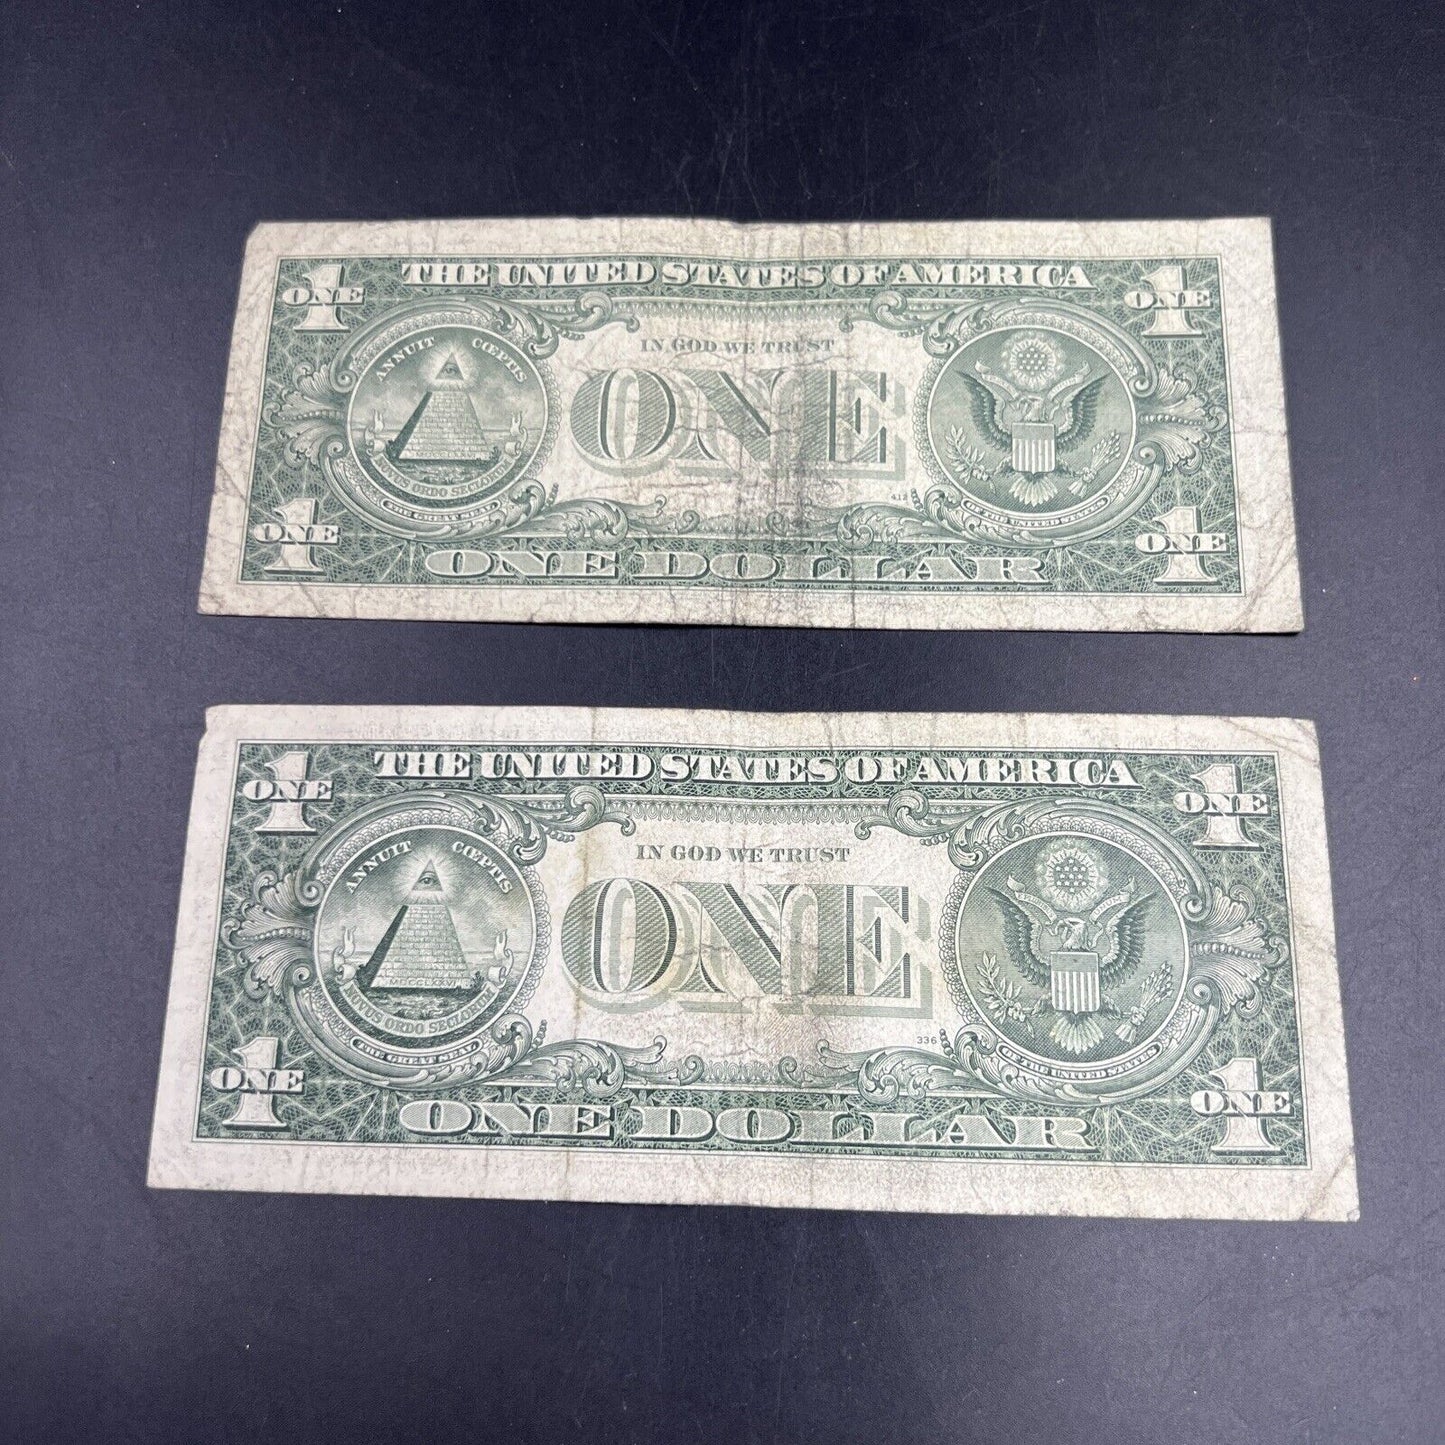 Lot of 2 1981 $1 One Dollar FRN Federal Reserve Notes Neat Fancy Serial Numbers